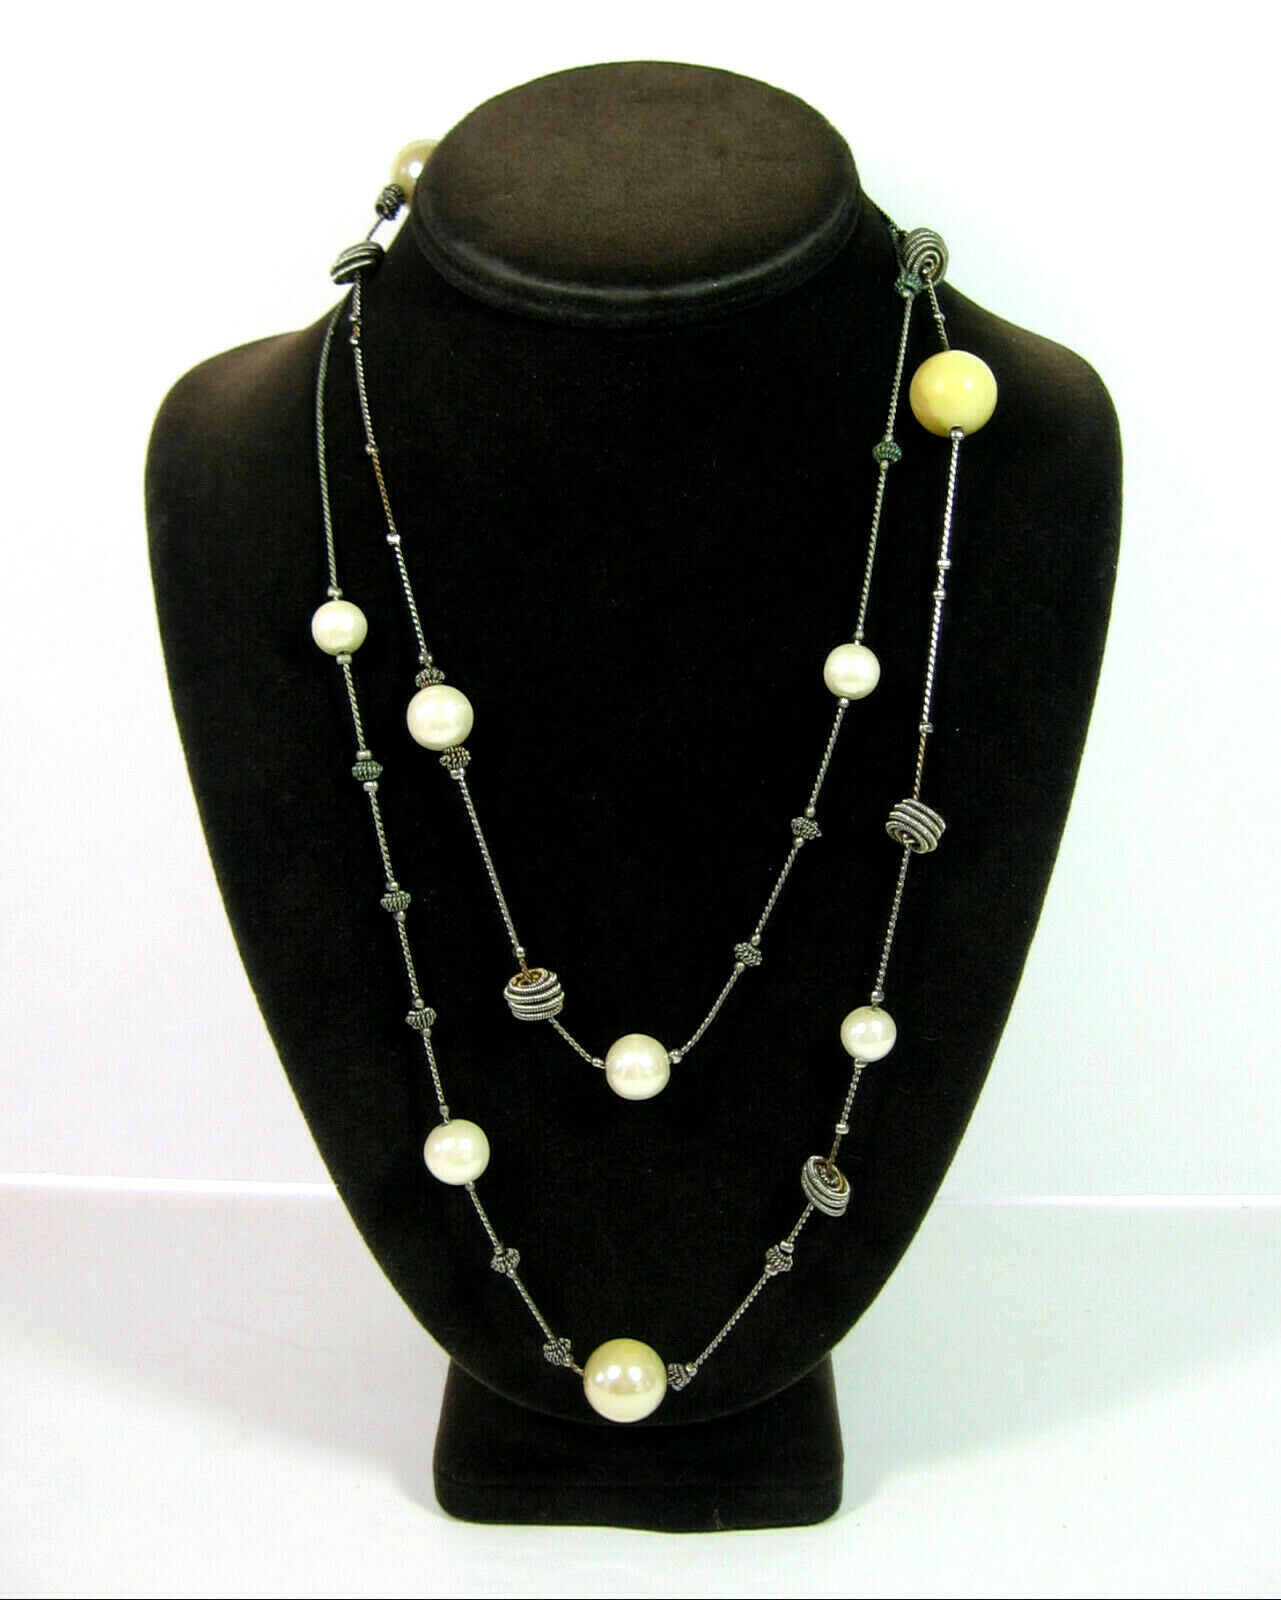 Primary image for Coiled SPRING BEADS & Faux Pearls NECKLACE Vintage Silvertone Off White 44"